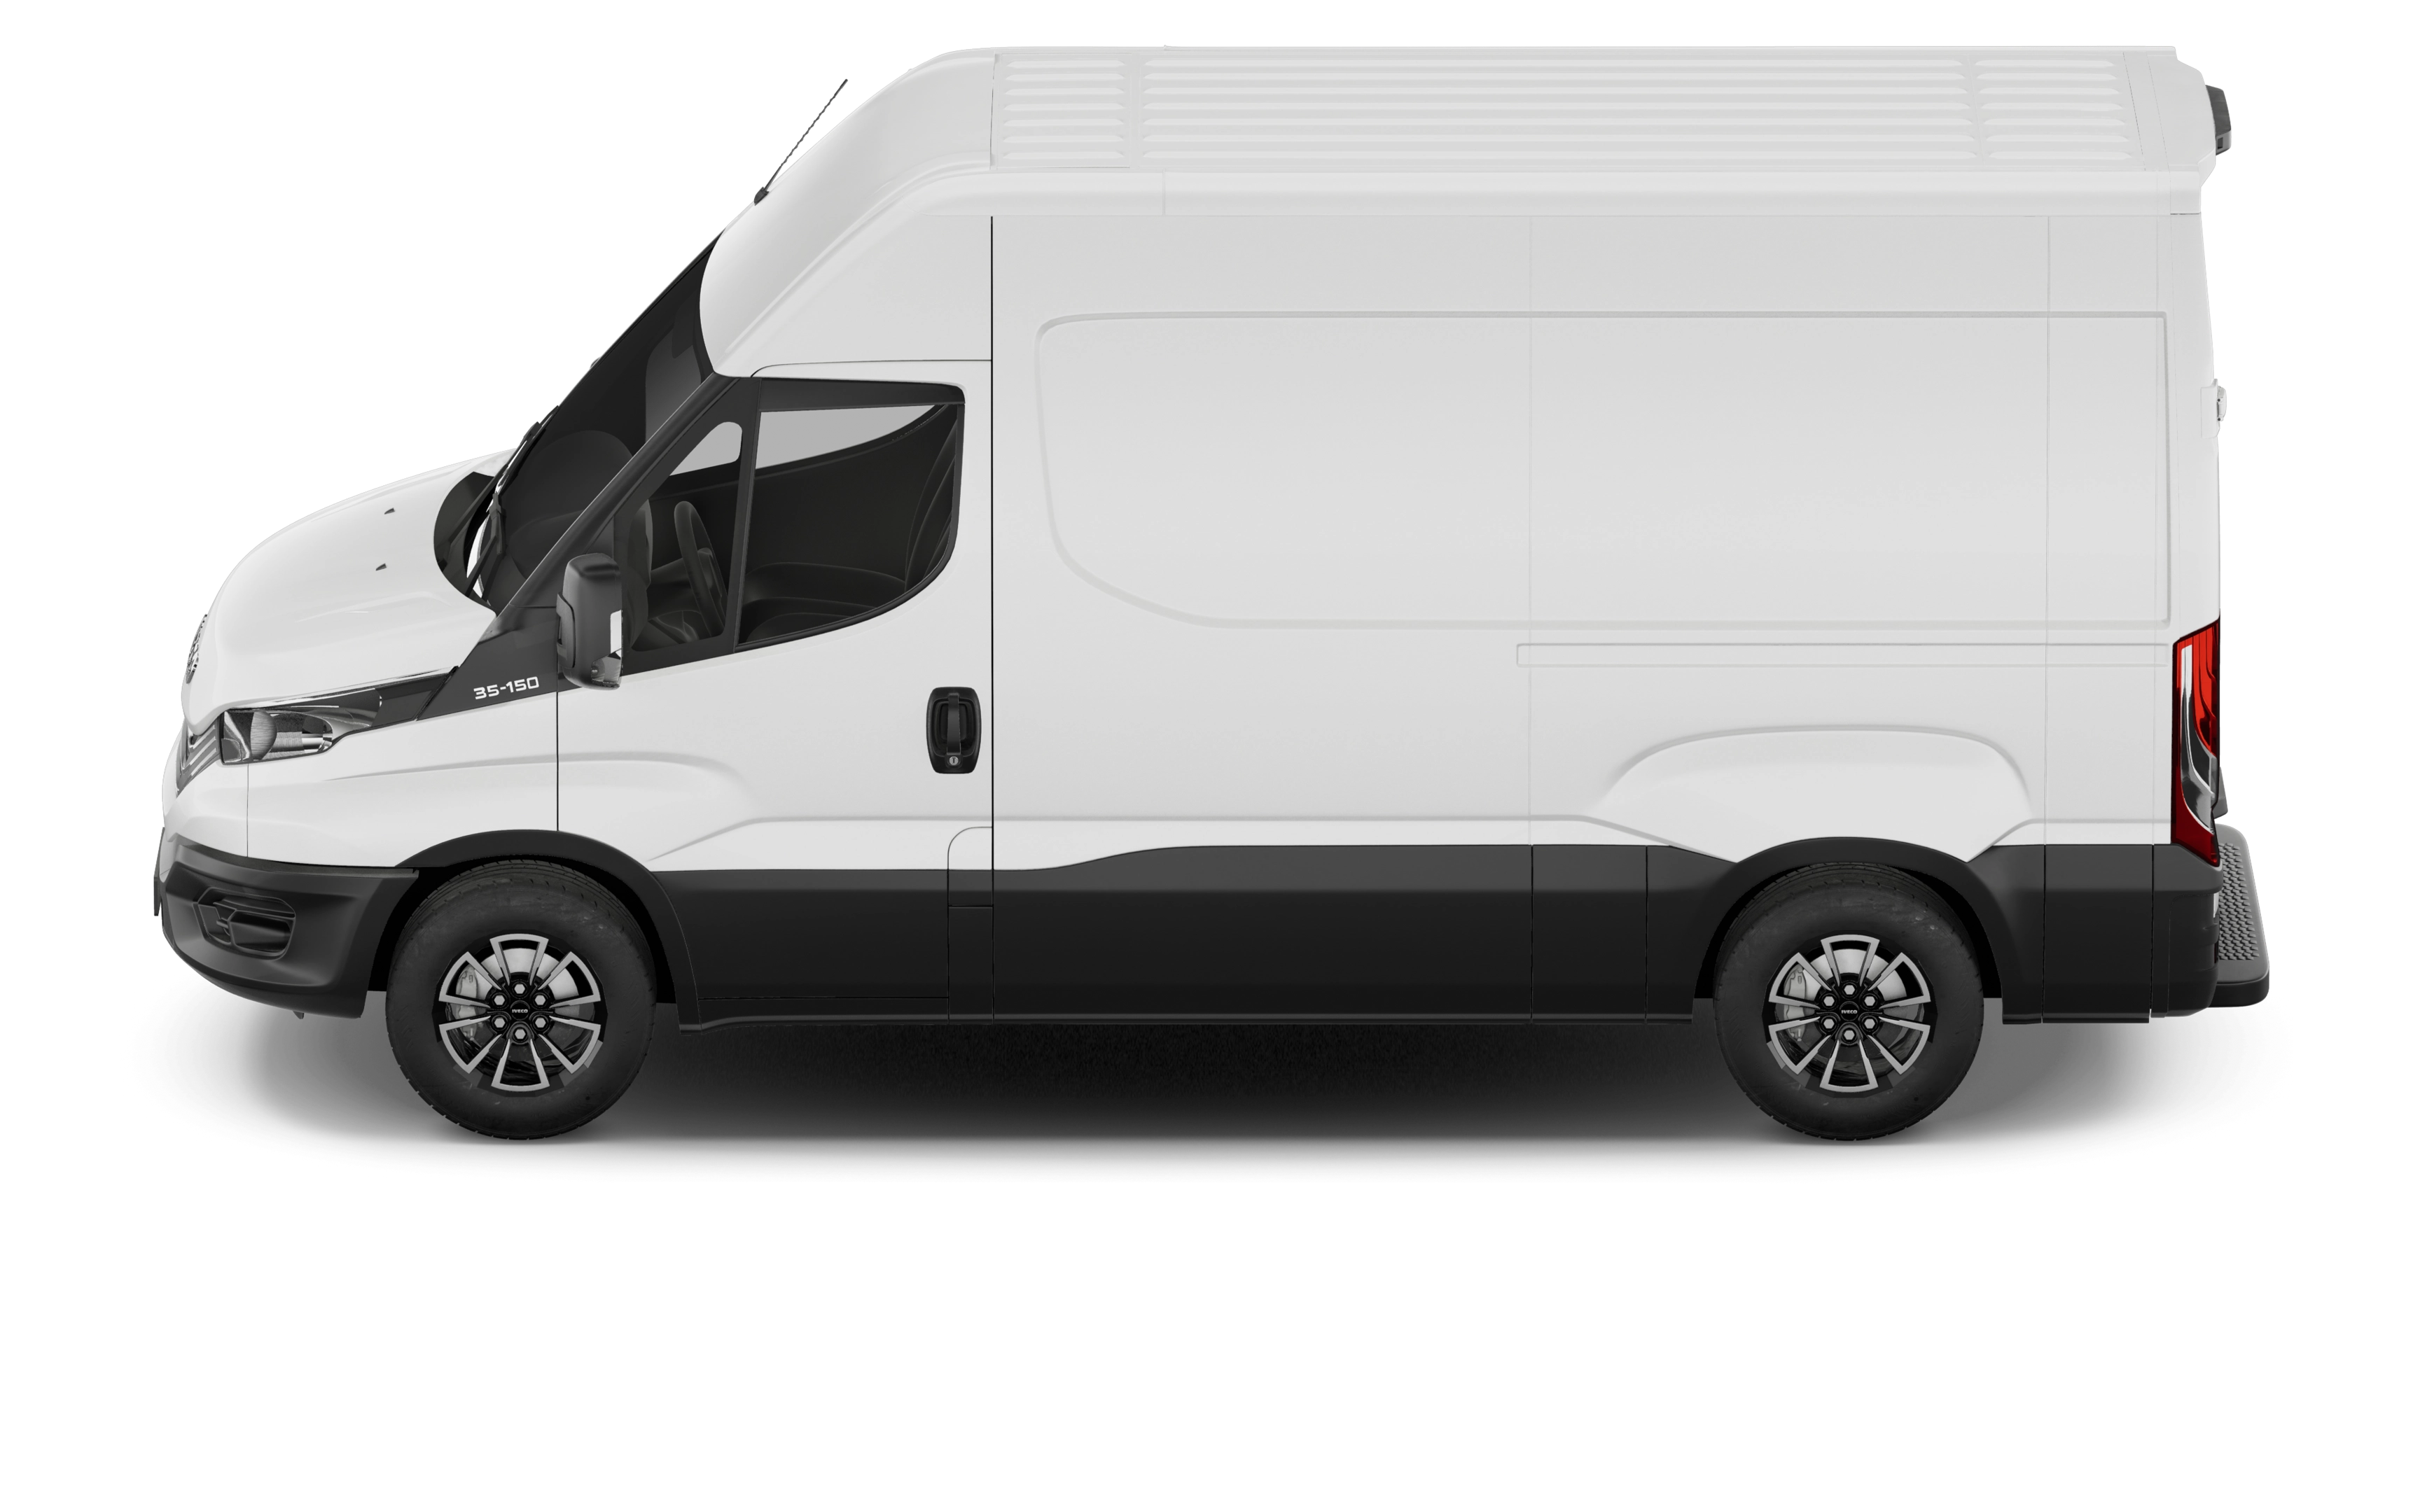 Iveco edaily 35s14 electric 140kw 74kwh high roof van 3520l wb auto [22kw]